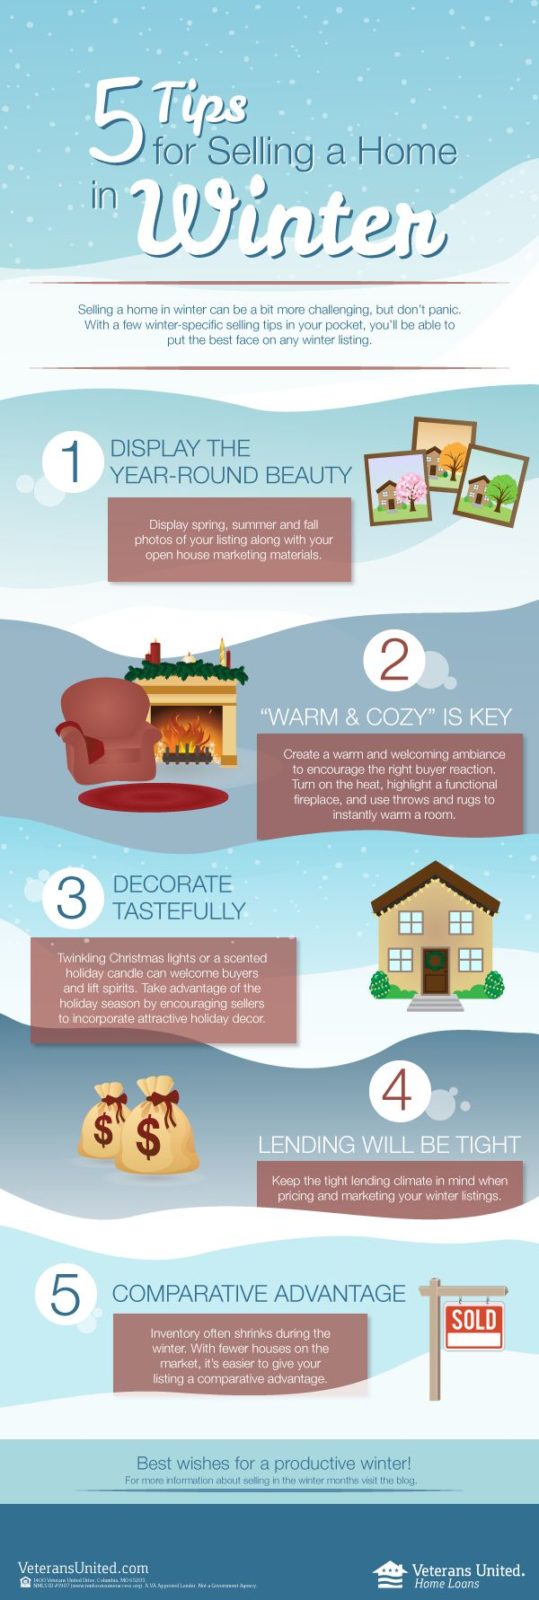 5 Tips for Selling a Home In Winter